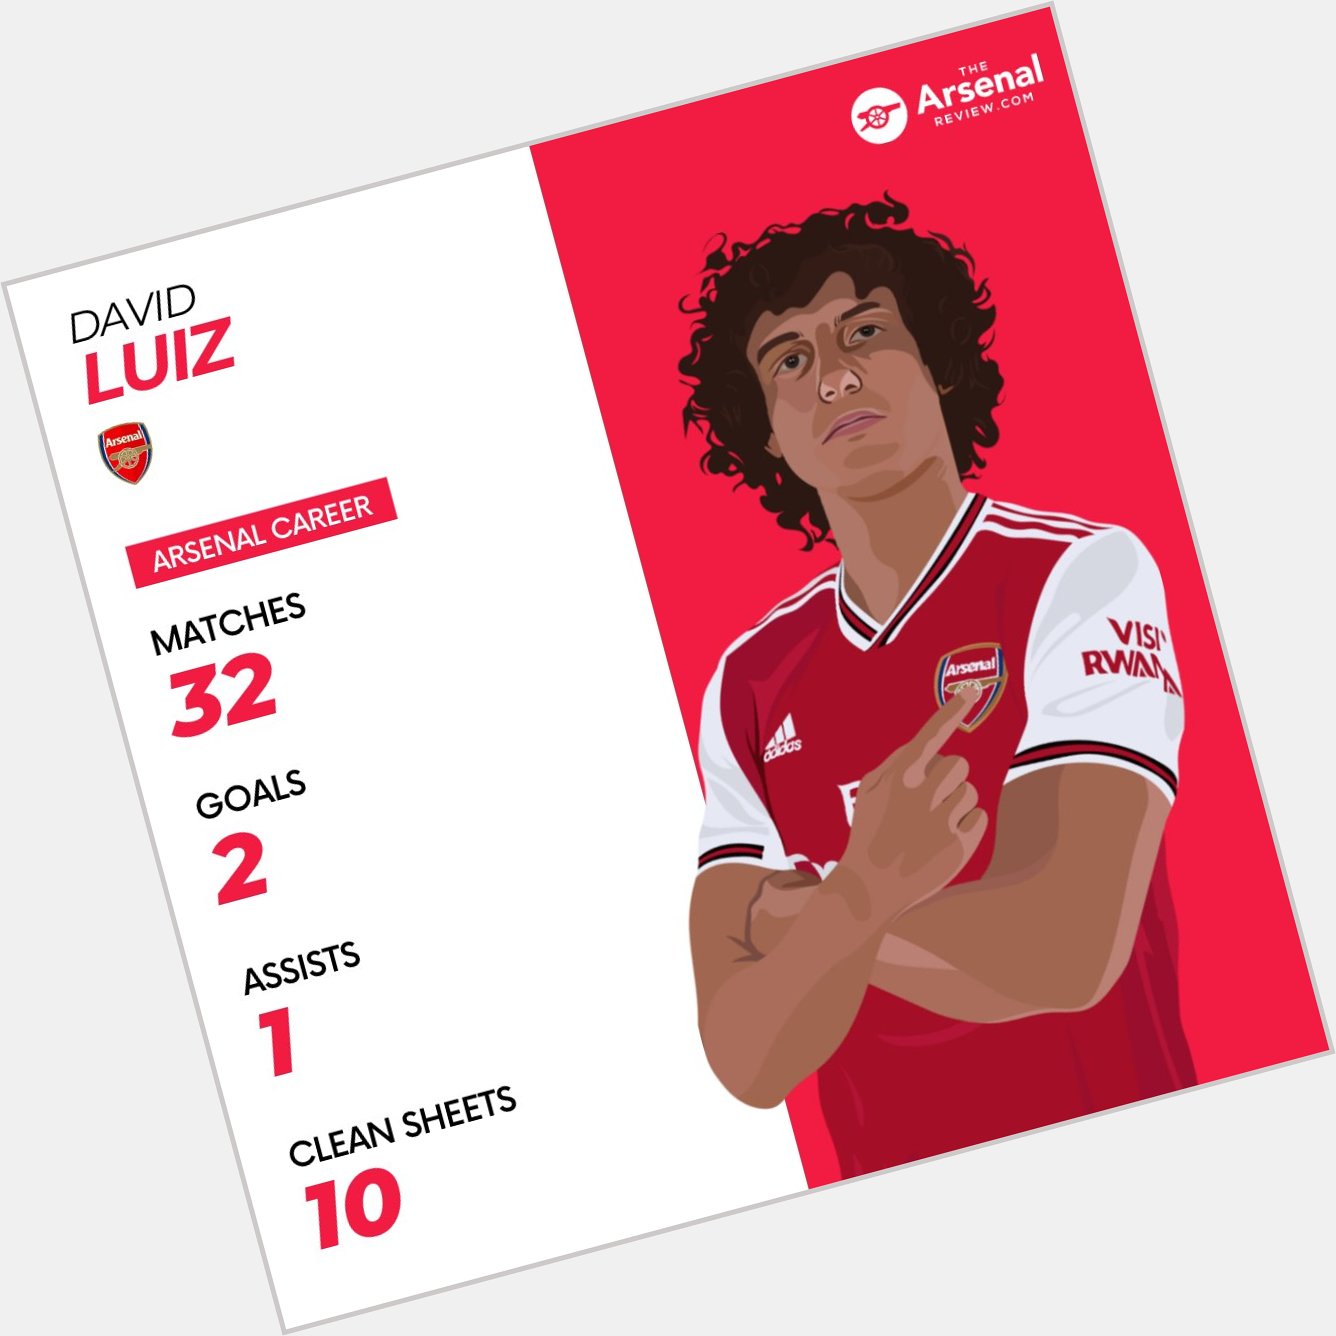  Happy Birthday to David Luiz, who turns 33 today. Hope you have a good one, David! 